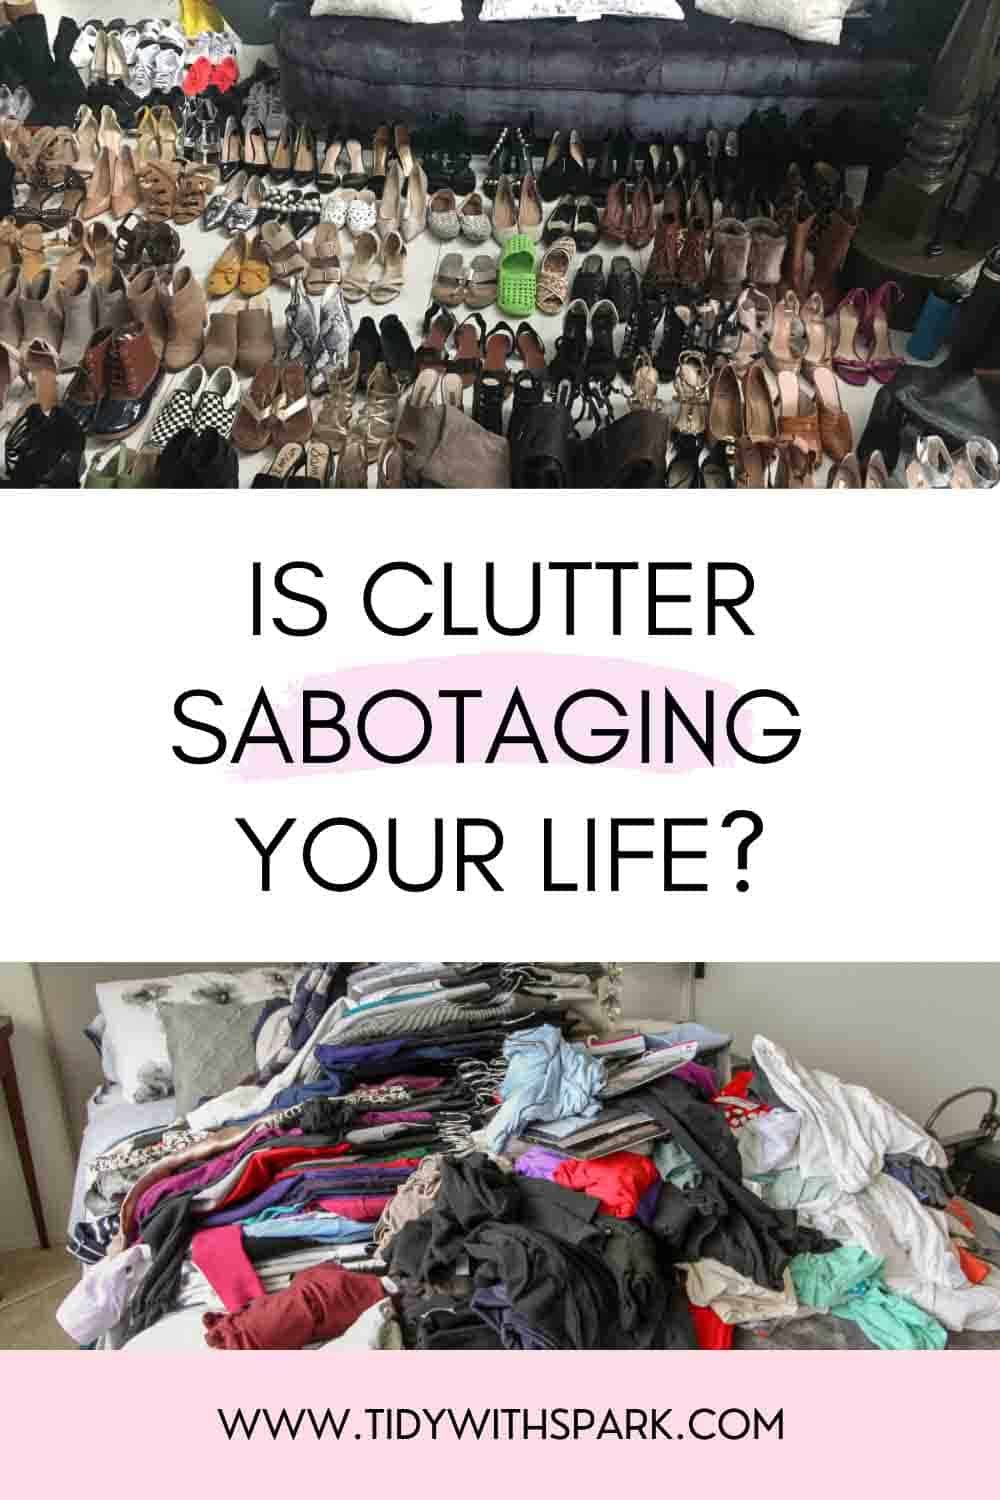 Promotional image for 3 Ways Clutter is Self-Sabotage for tidy with spark blog